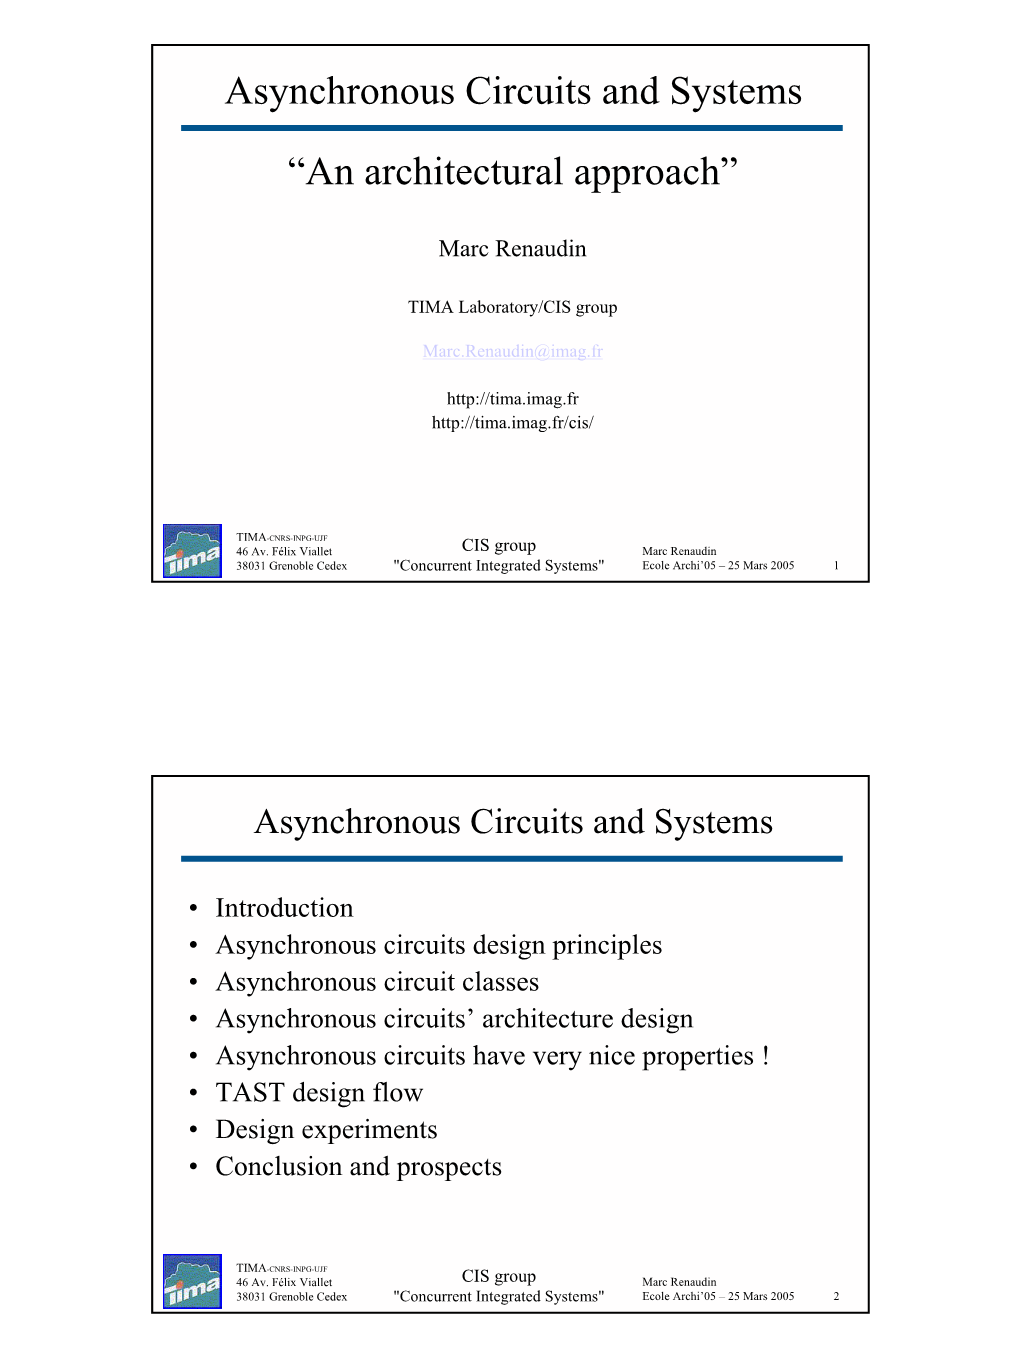 Asynchronous Circuits and Systems “An Architectural Approach”